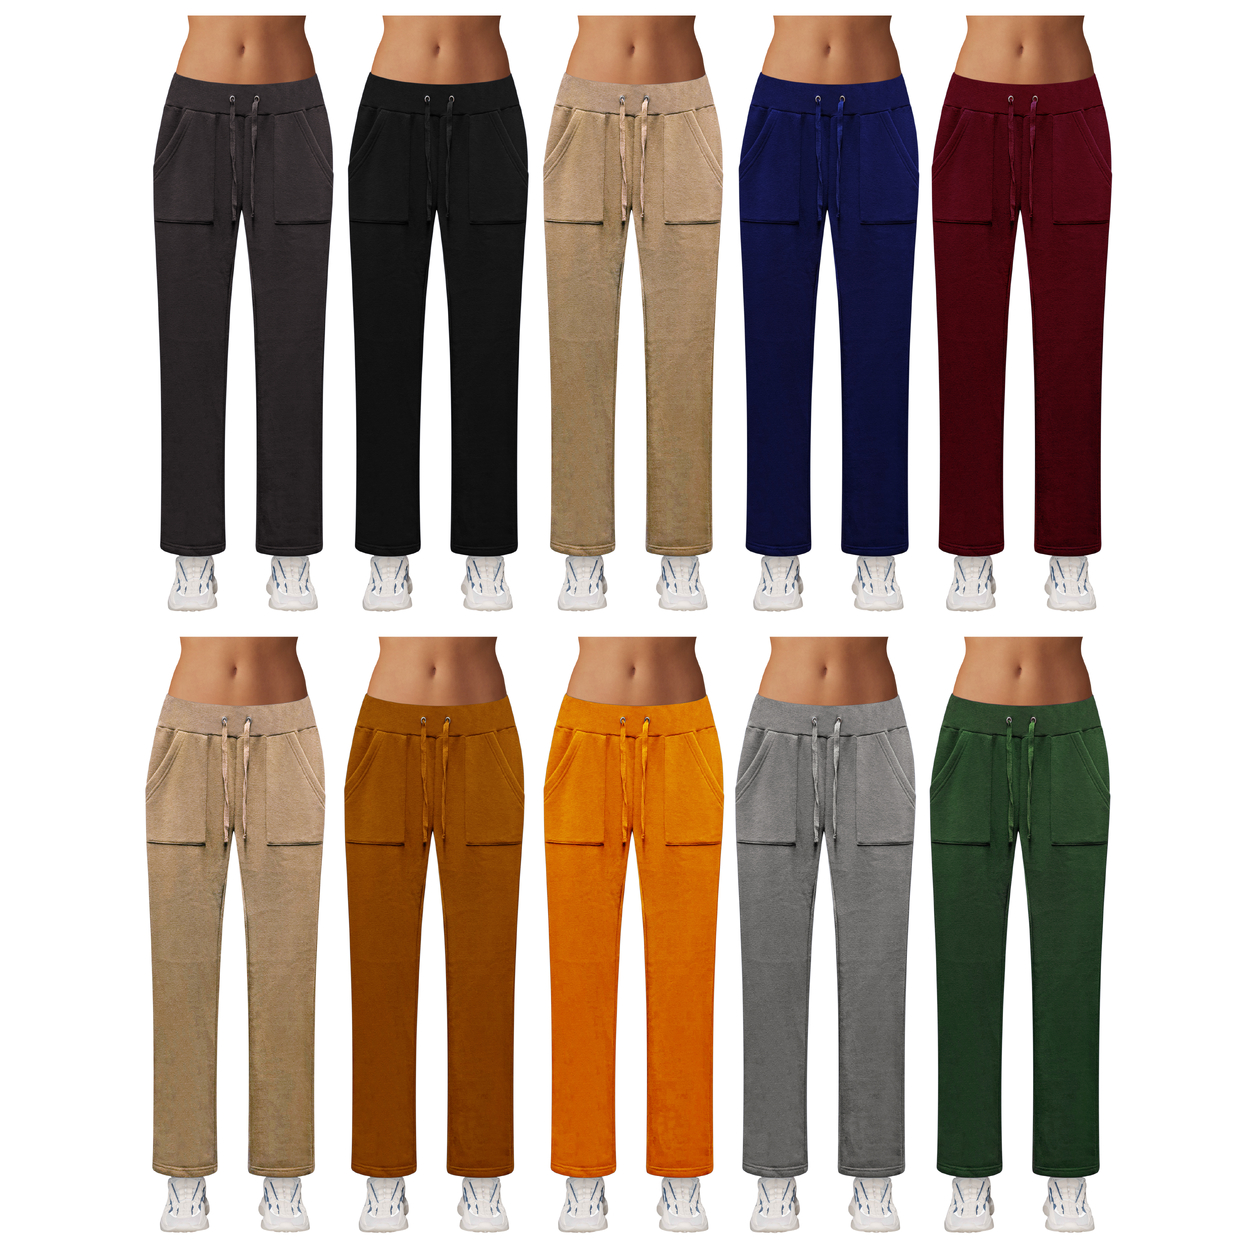 2-Pack: Women's Ultra-Soft Cozy Fleece Lined Elastic Waistband Terry Knit Pants - Assorted, Large